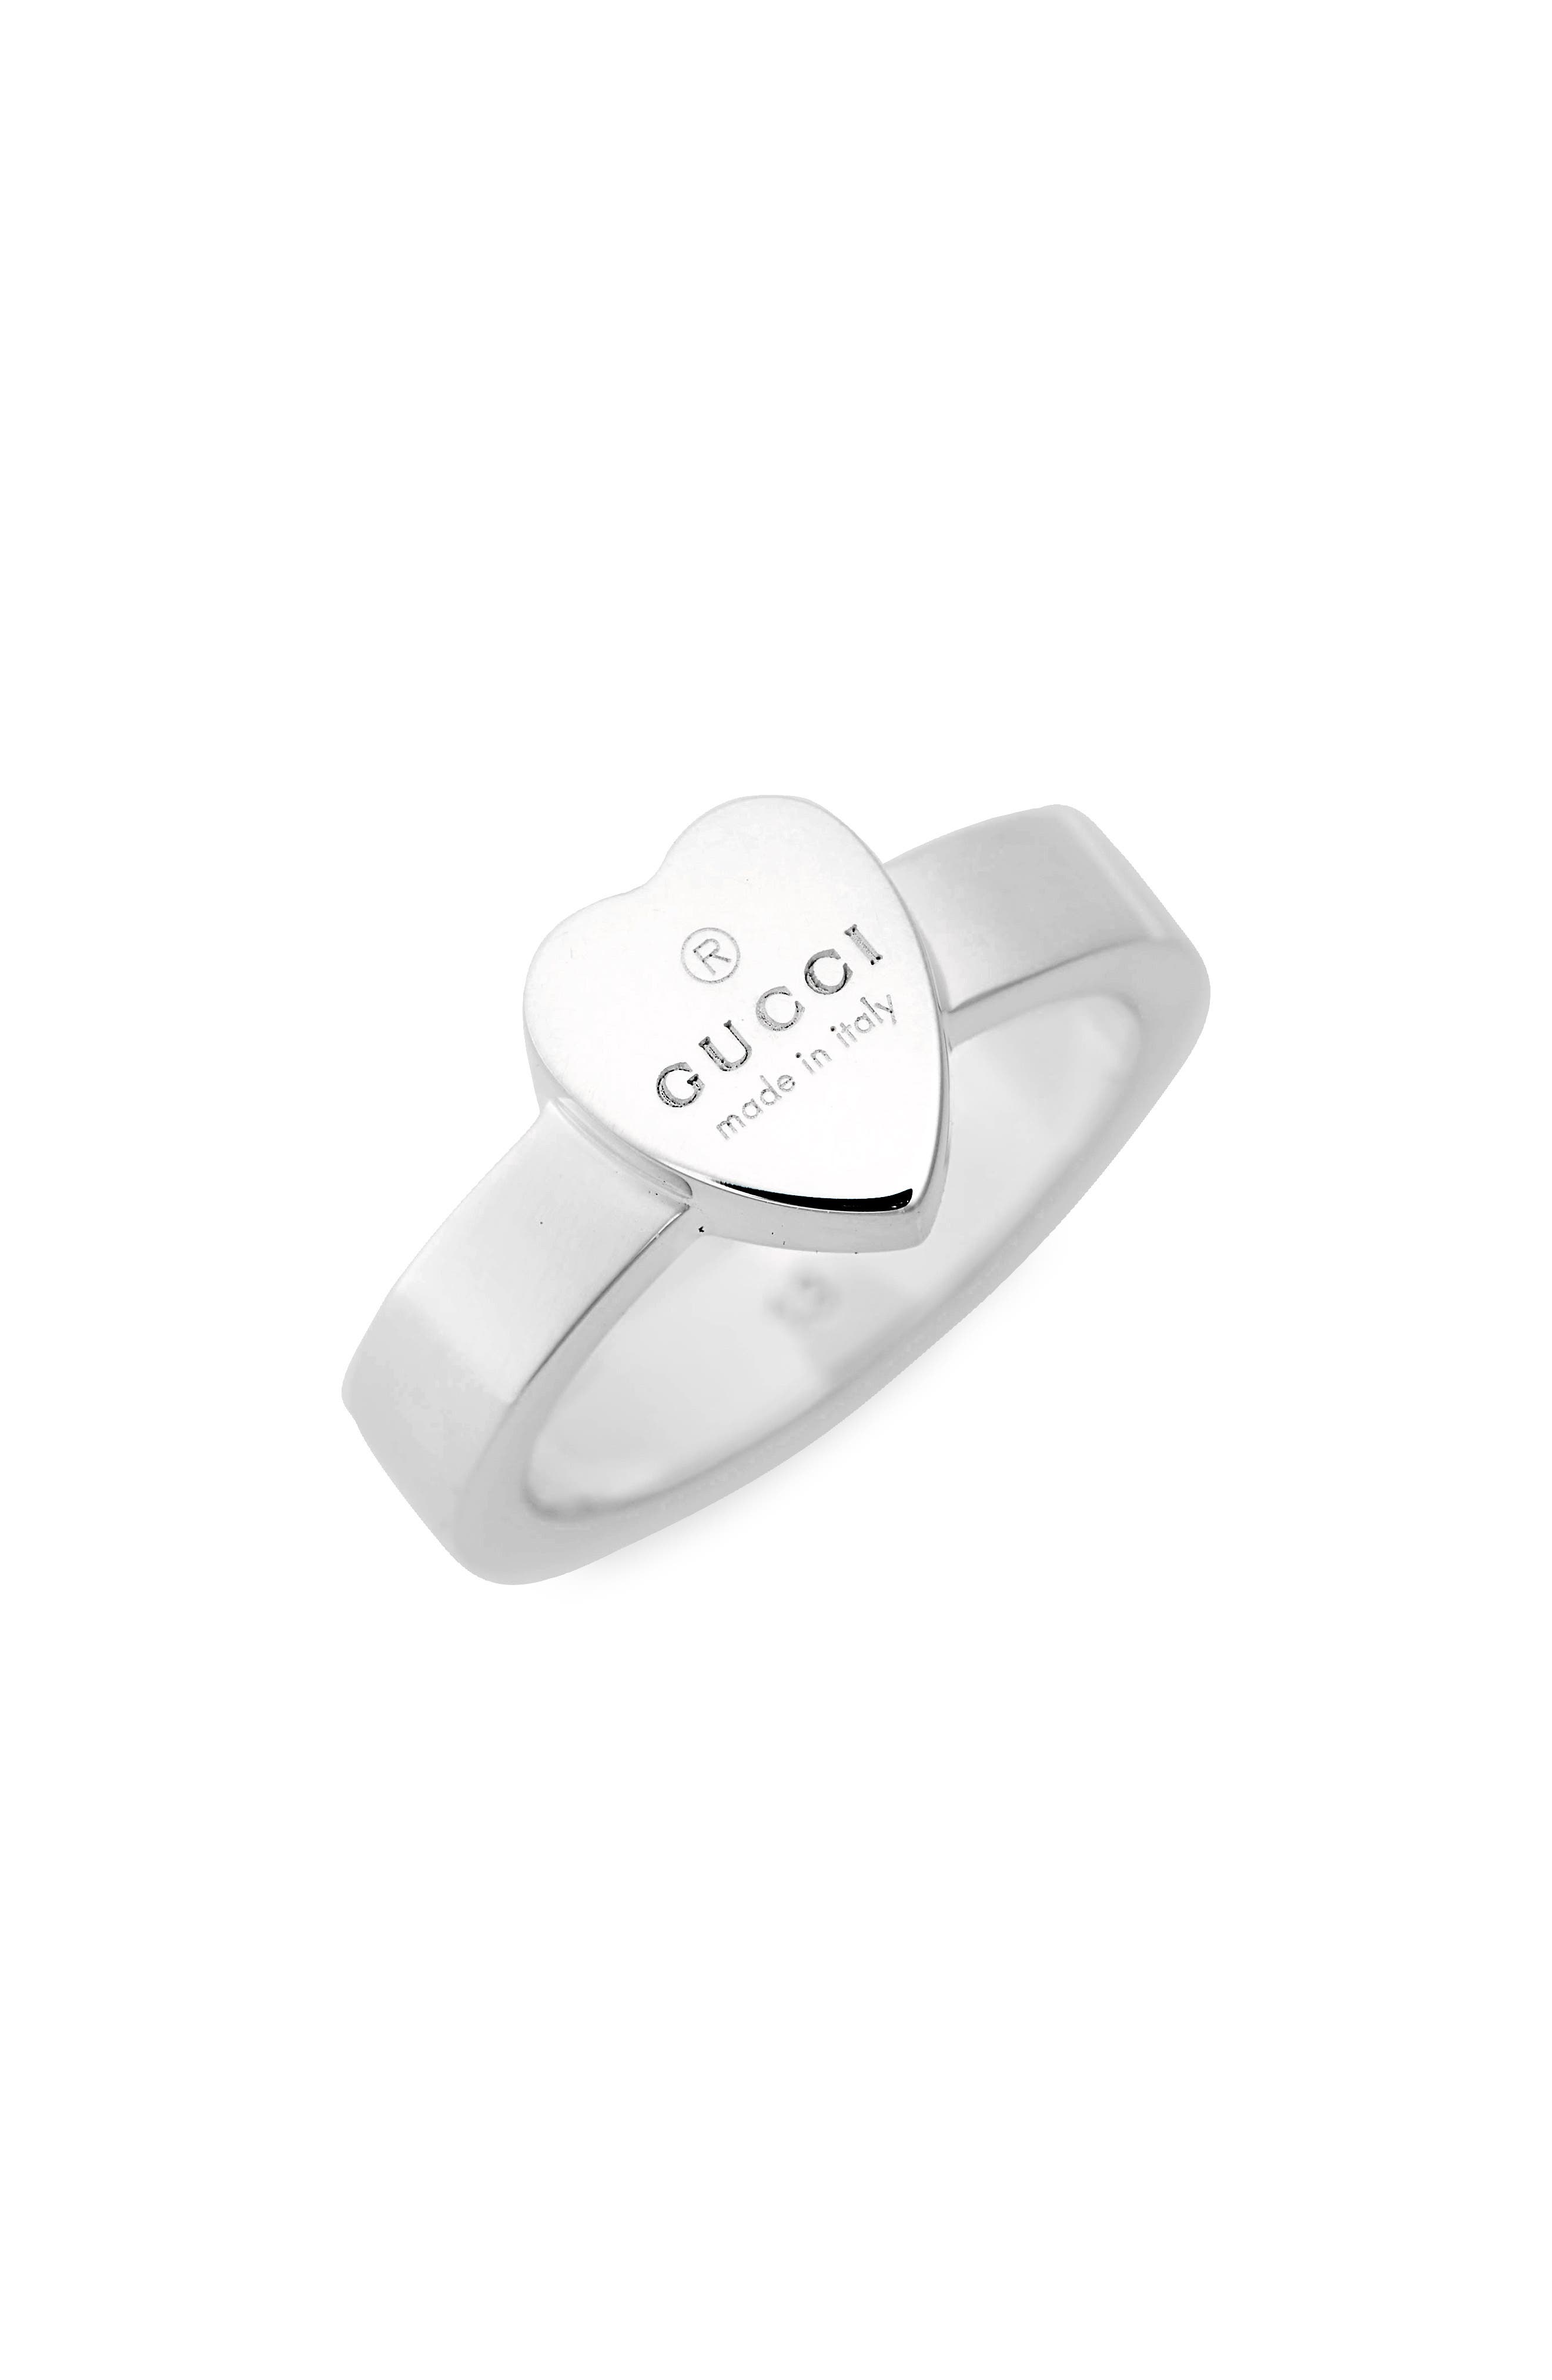 Gucci Trademark Heart Ring in Sterling Silver at Nordstrom, Size 6.5 Us